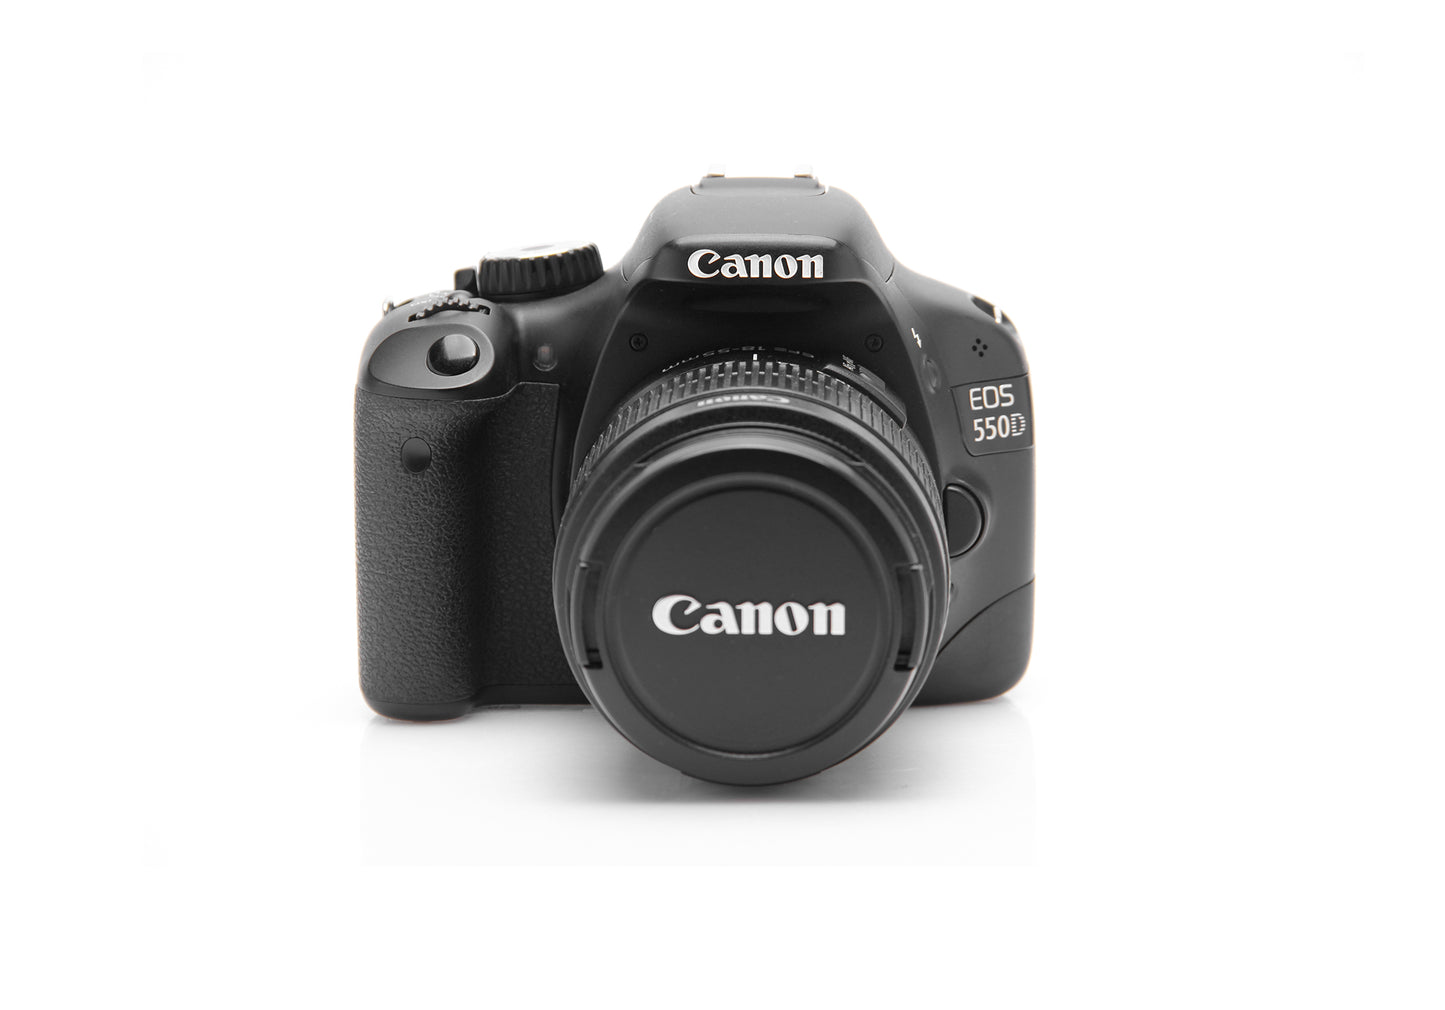 Used Canon 550D Camera with 18-55mm Lens